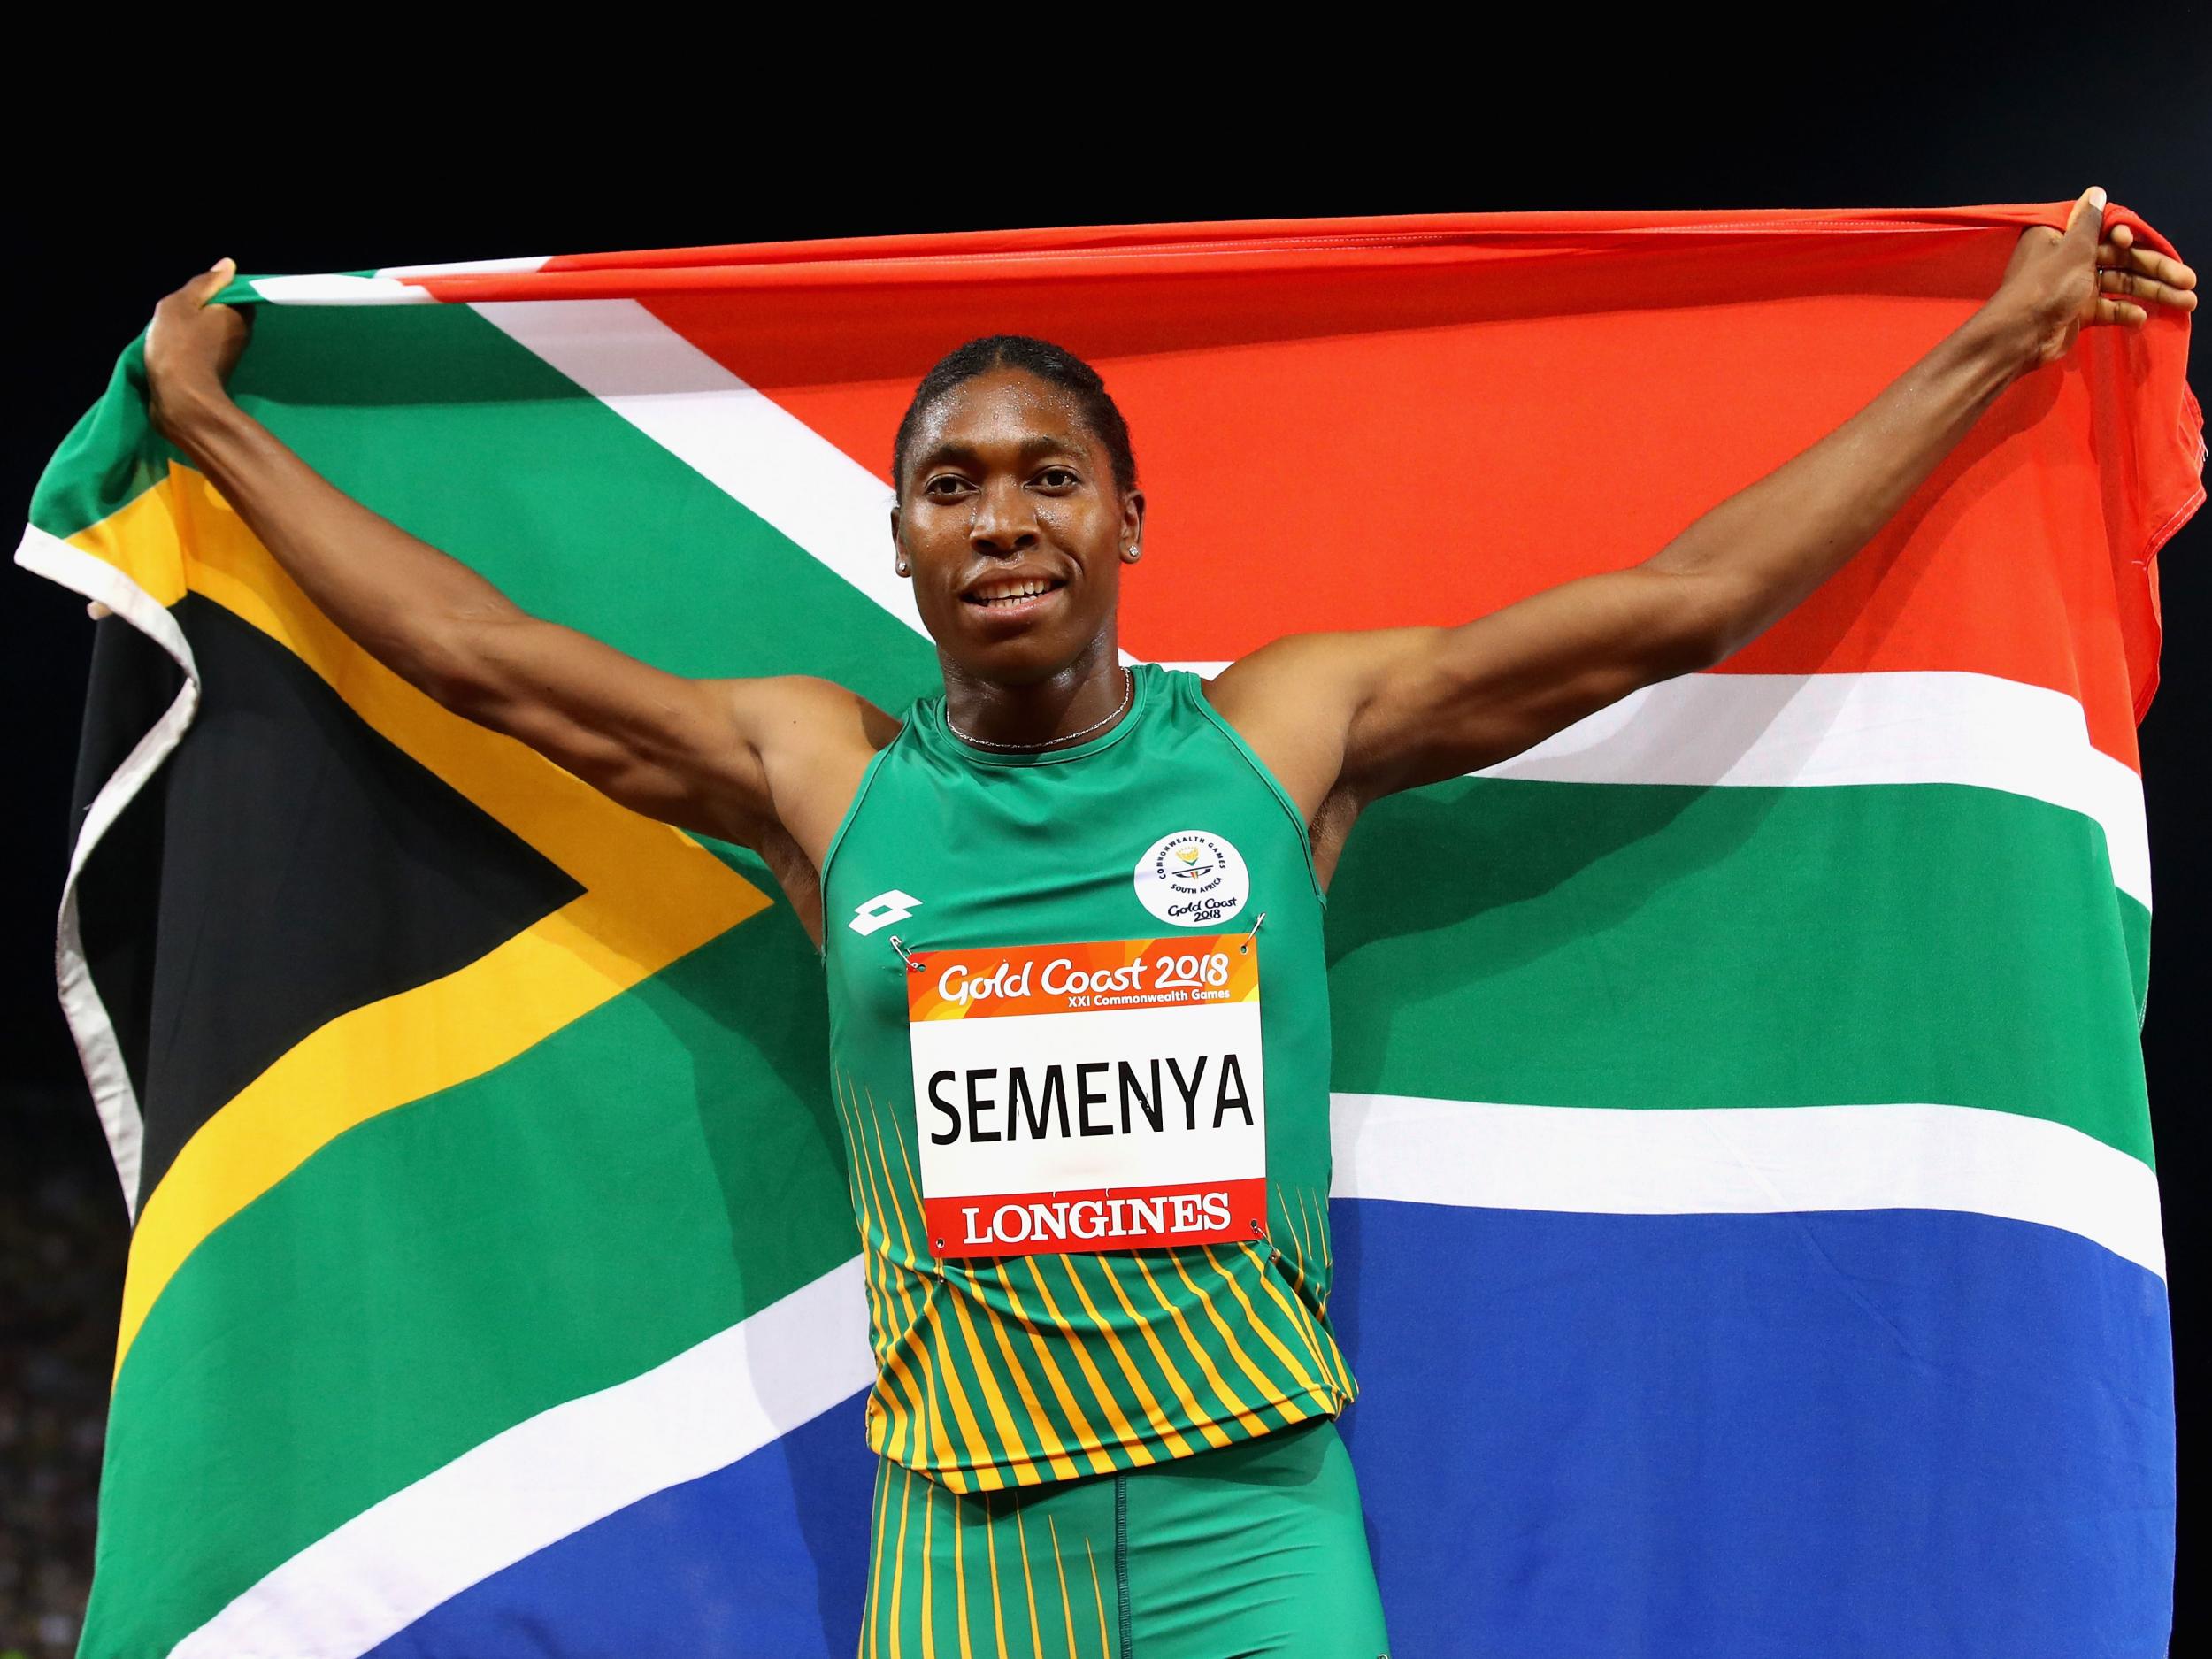 Caster Semenya will be affected by the new rules